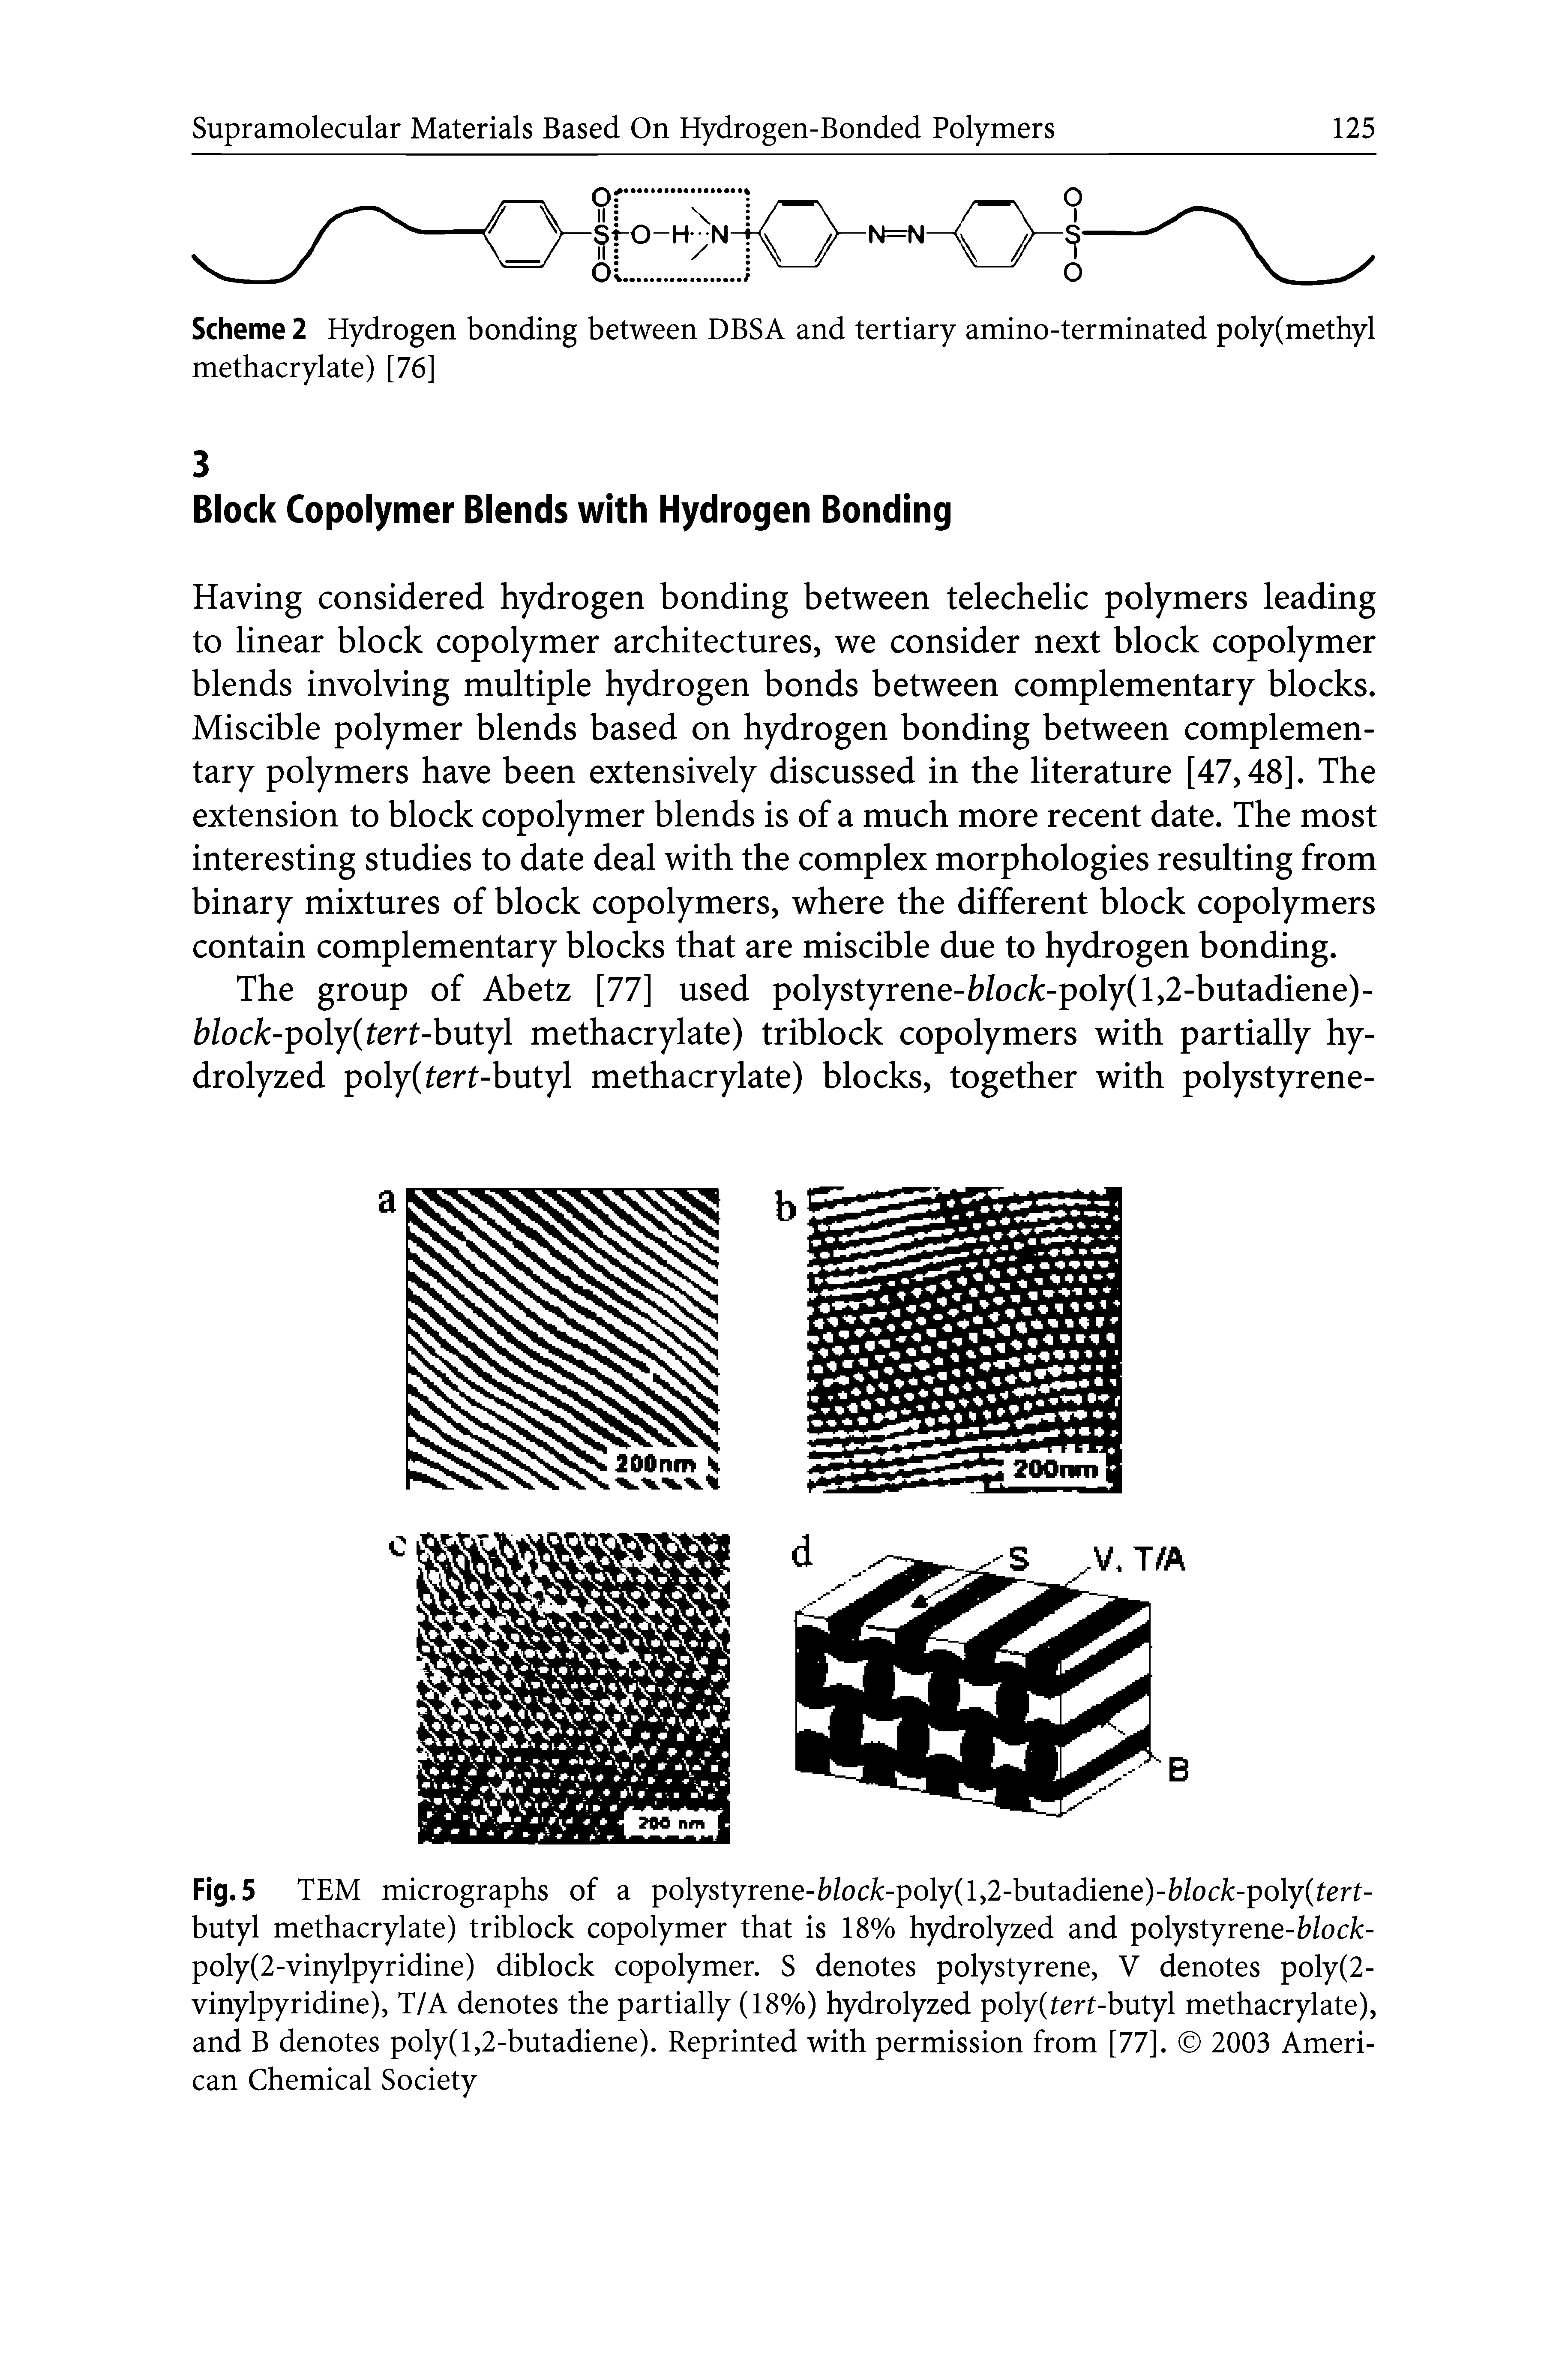 Fig.5 TEM micrographs of a polystyrene-Z7/oc/c-poly( 1,2-butadiene)-Z7/oc/c-poly(tert-butyl methacrylate) triblock copolymer that is 18% hydrolyzed and polystyrene-Z /oc/c-poly(2-vinylpyridine) diblock copolymer. S denotes polystyrene, V denotes poly(2-vinylpyridine), T/A denotes the partially (18%) hydrolyzed poly(tert-butyl methacrylate), and B denotes poly( 1,2-butadiene). Reprinted with permission from [77]. 2003 American Chemical Society...